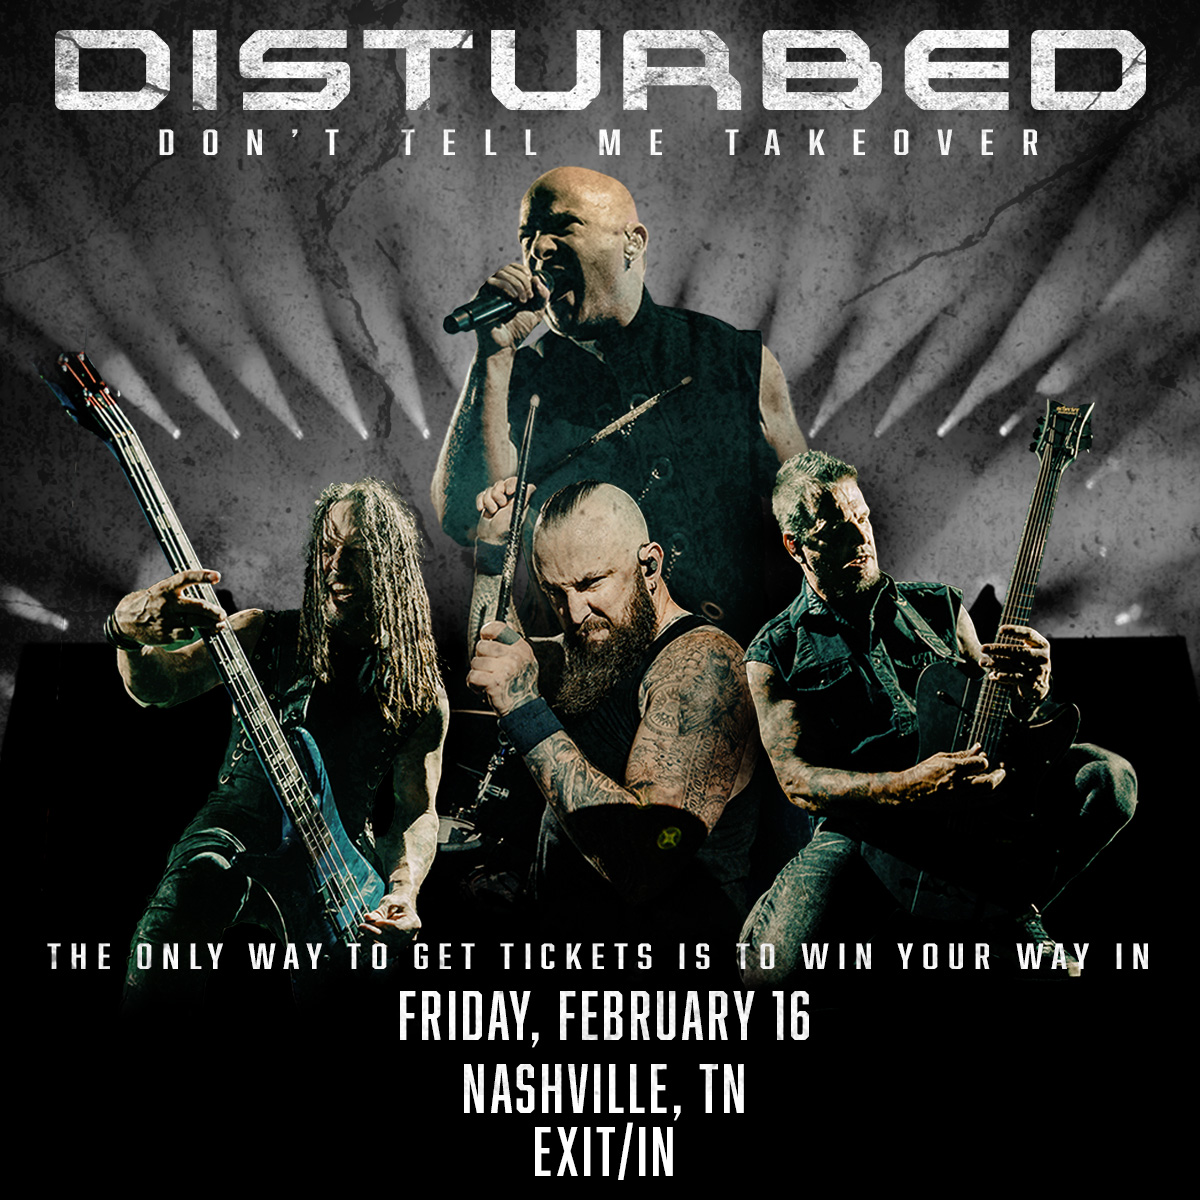 Disturbed's "Don't Tell Me Takeover" Contest for tix on Feb 16 at EXIT/IN in Nashville 